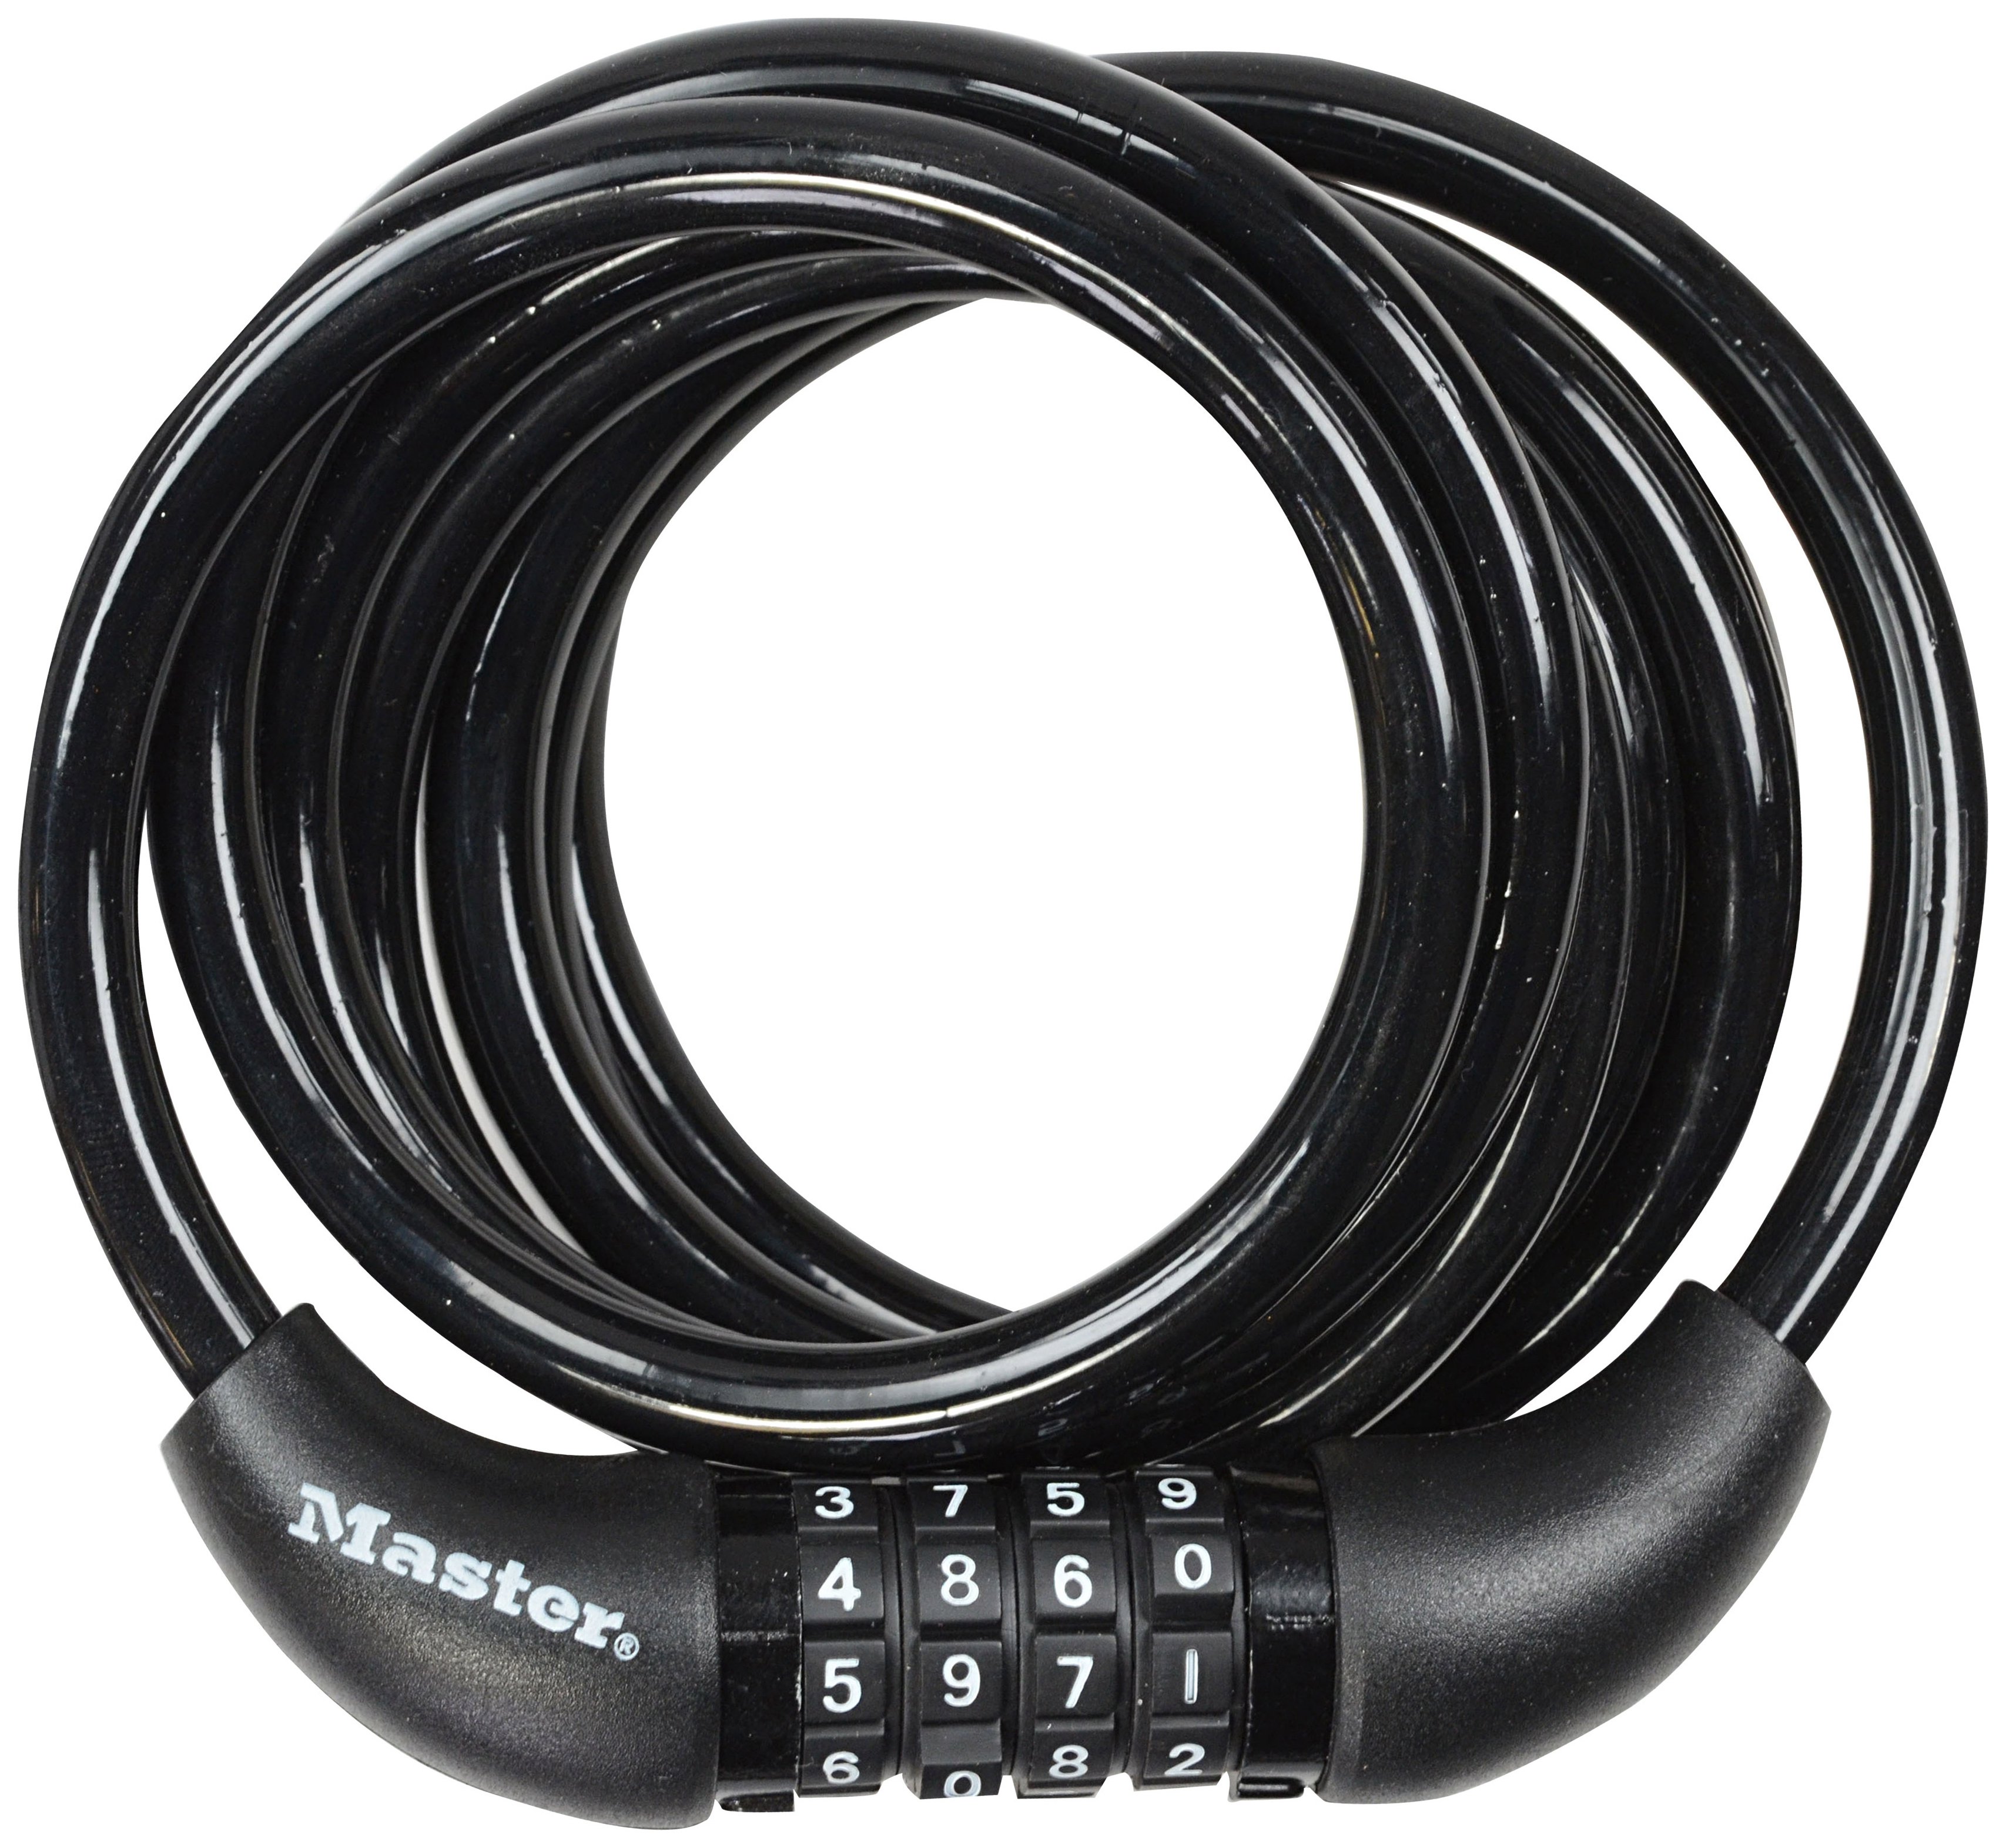 Master Lock - 180cm x 8mm Cycle Cable Lock Review